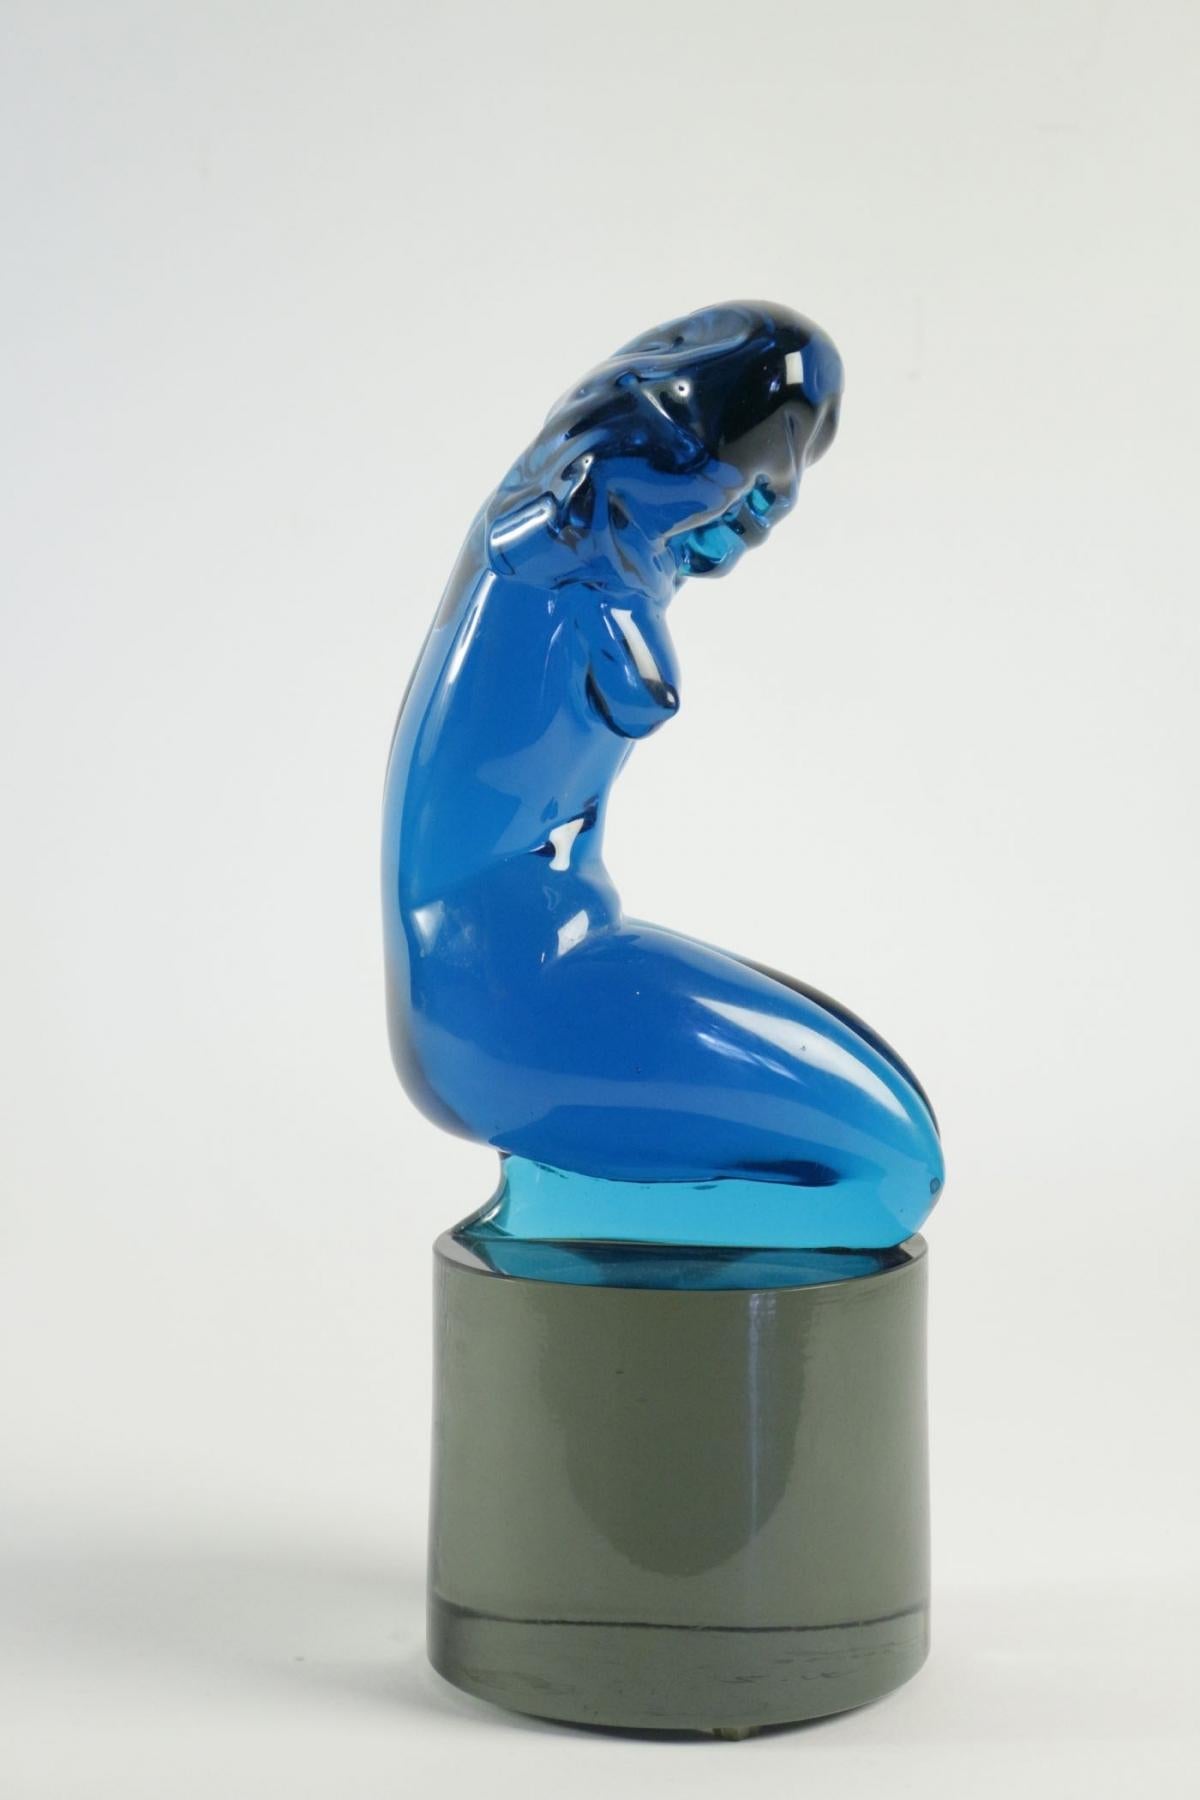 Late 20th Century Important Statue of L.rosin, Italy, Murano Glass Blue, Signed